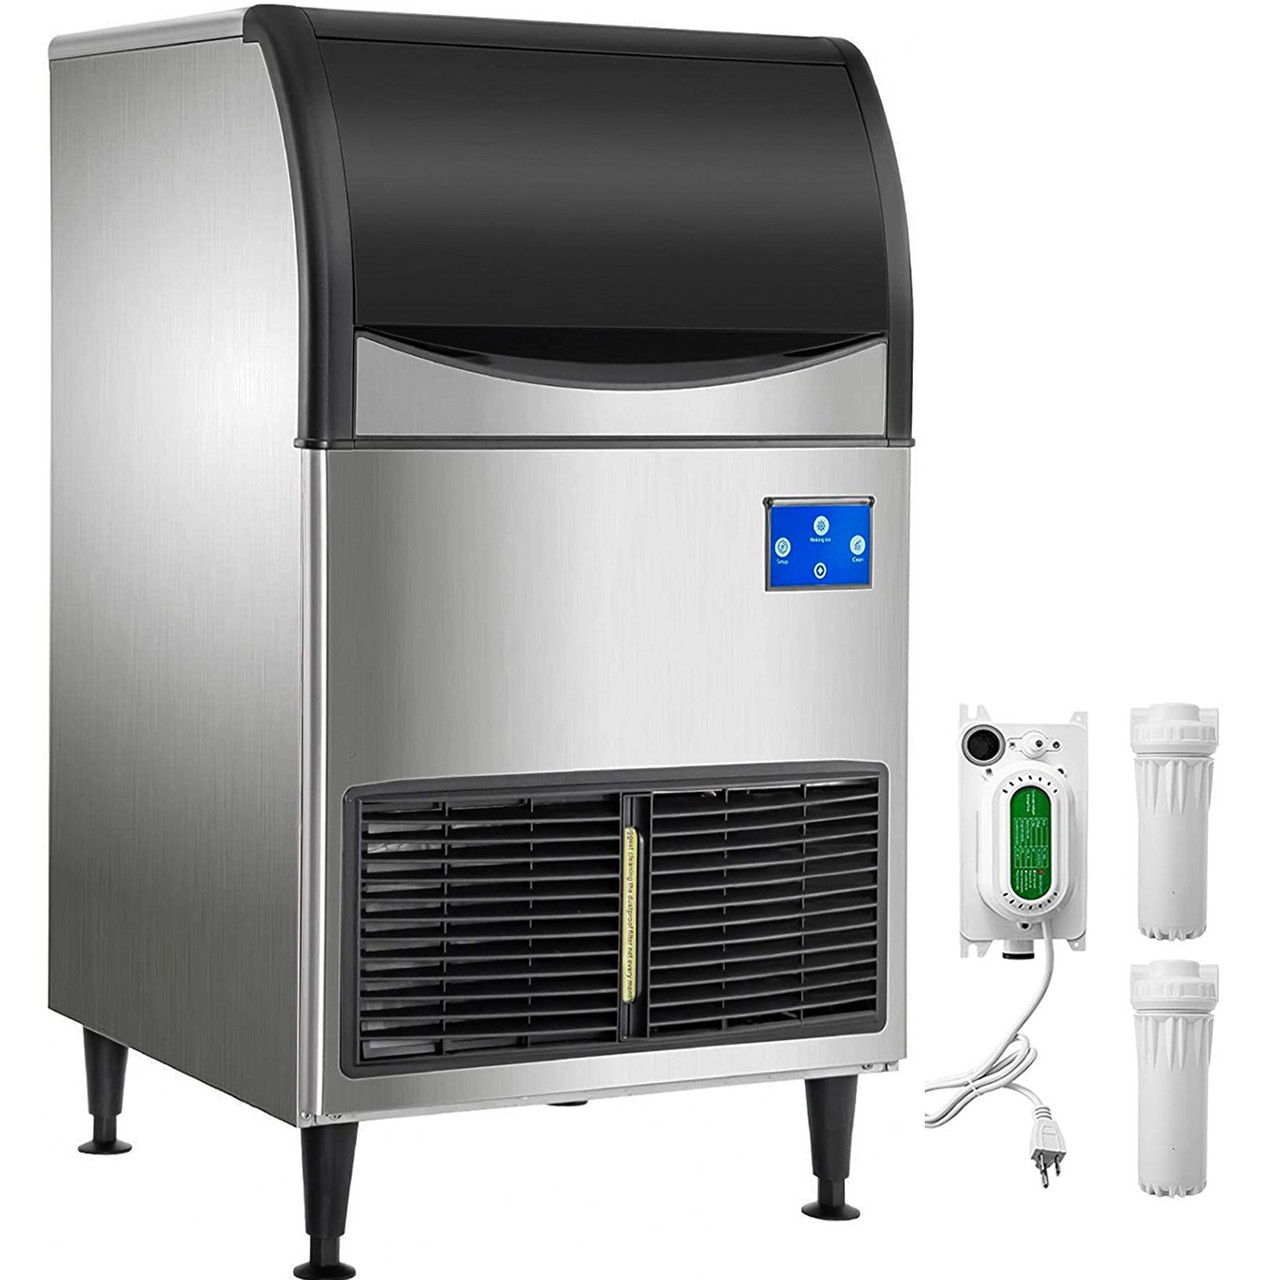 Commercial Ice Maker Machine, WiFi Control 265LBS/24H 121LBS Large Storage Ice Machine with Upgraded LCD Panel, SECOP Compressor, Air-Cooled, Include 2 Water Filters, Water Drain Pump, 2 Scoops